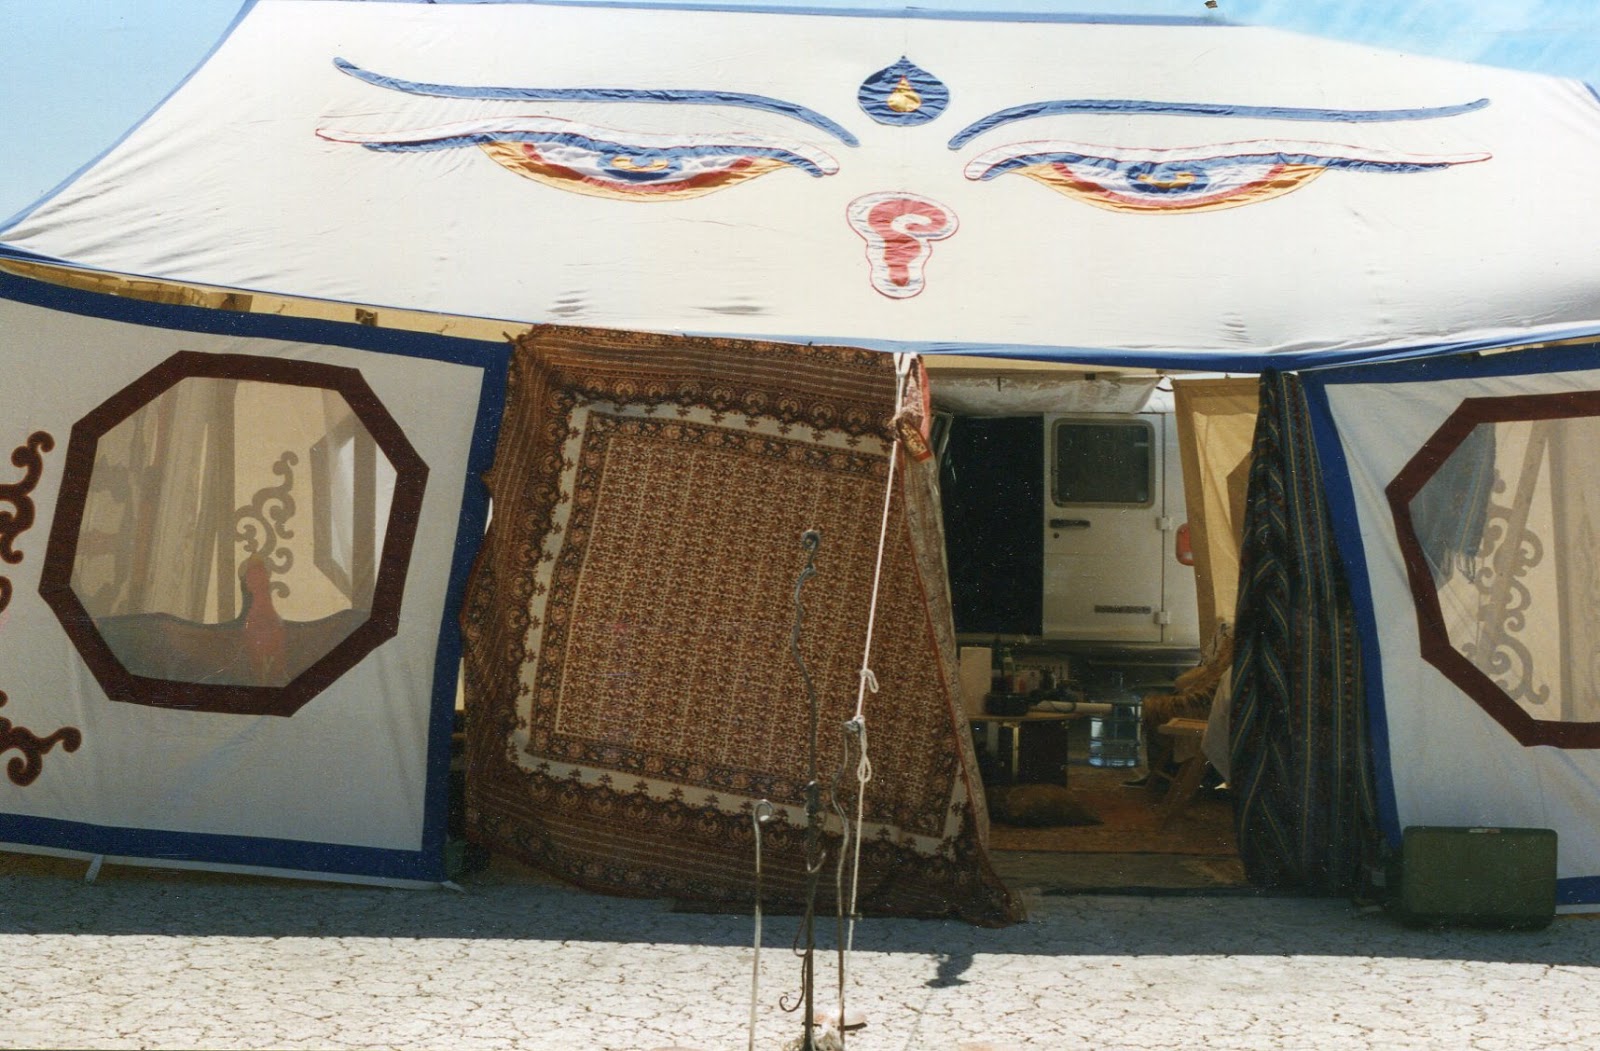 The Tibetan Tent from “Tent Tom” - previously used by the Beastie Boys on tour [courtesy of Mike Roberts]